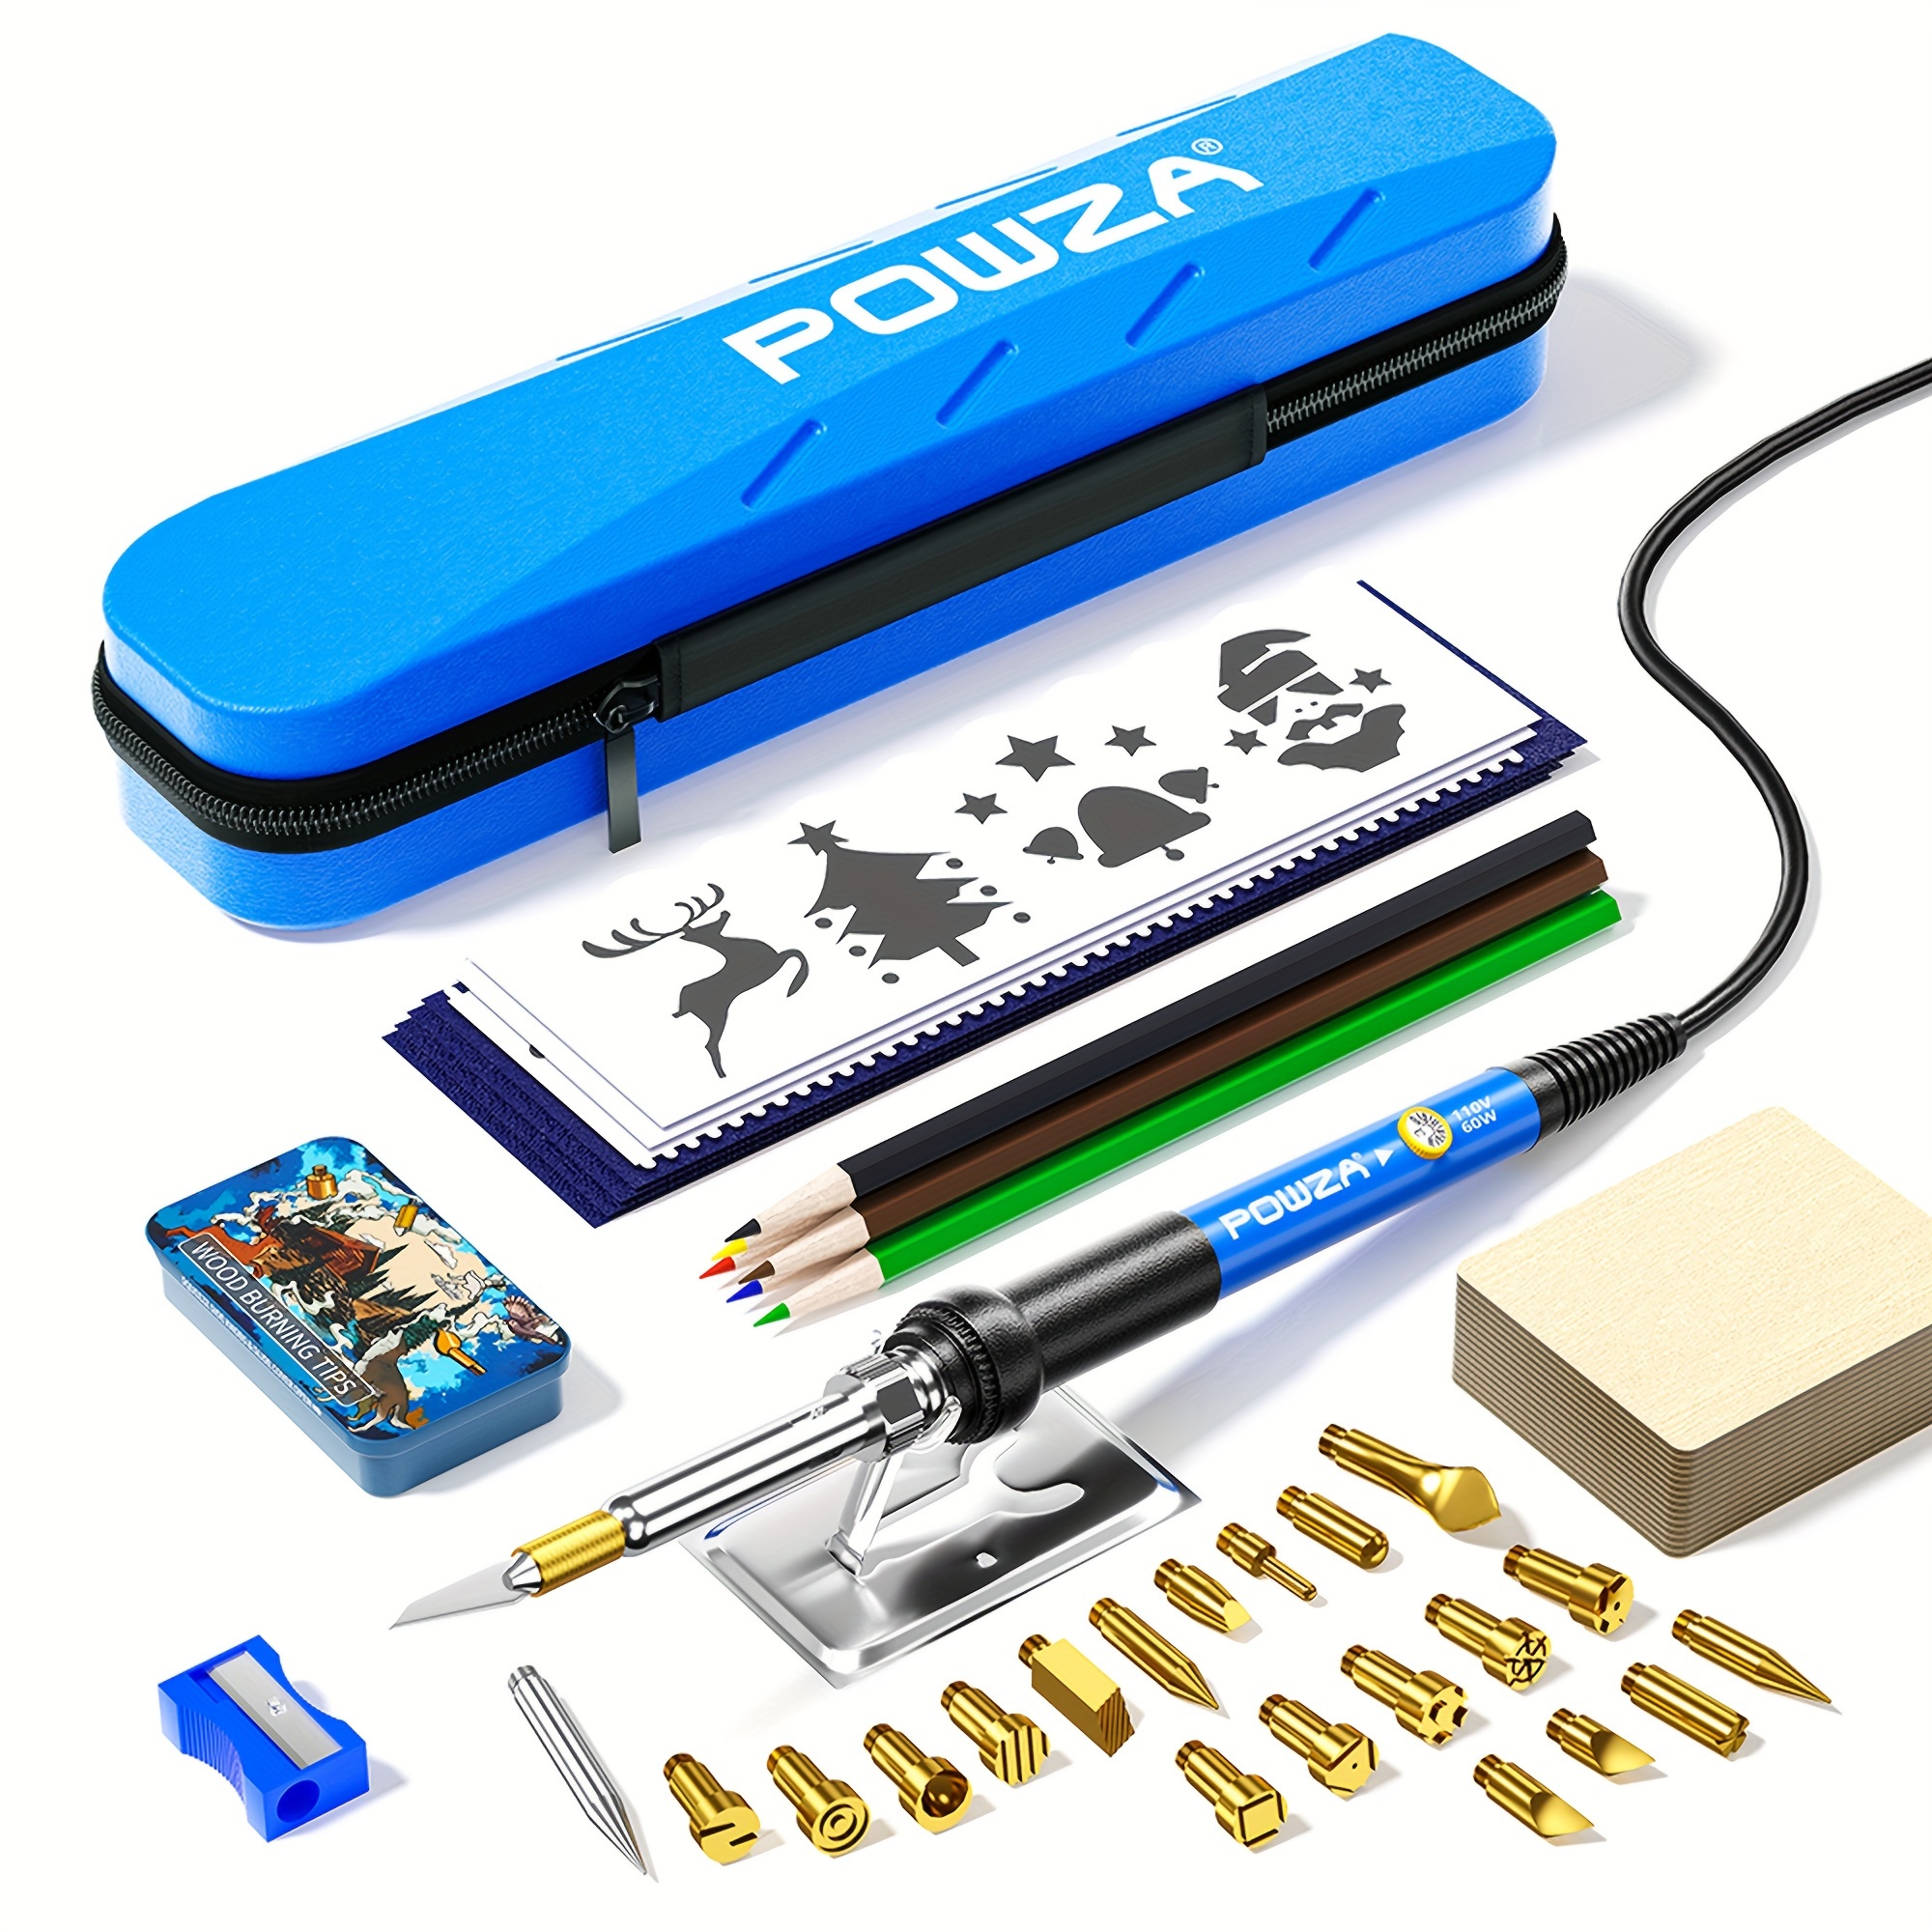 

Wood Burning Kit For Beginners, Adjustable Professional Wood Burner Pen Tool And Accessories, Woodburning Embossing Carving